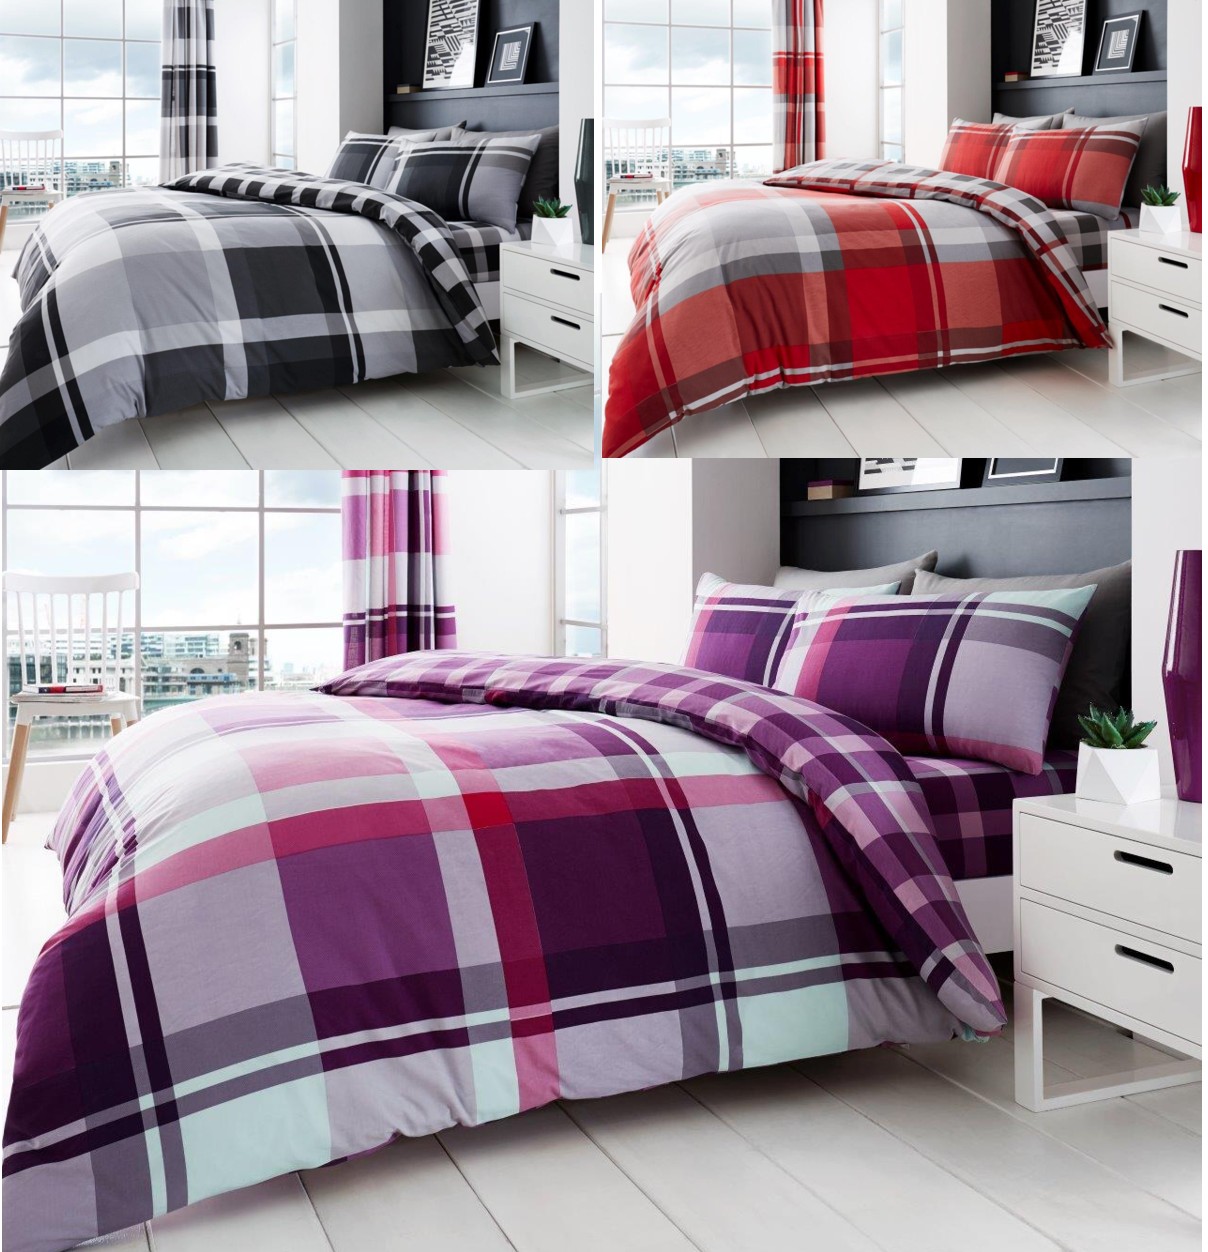 Waverly 4 Pcs Check Duvet Cover With Fitted Sheet Polycotton